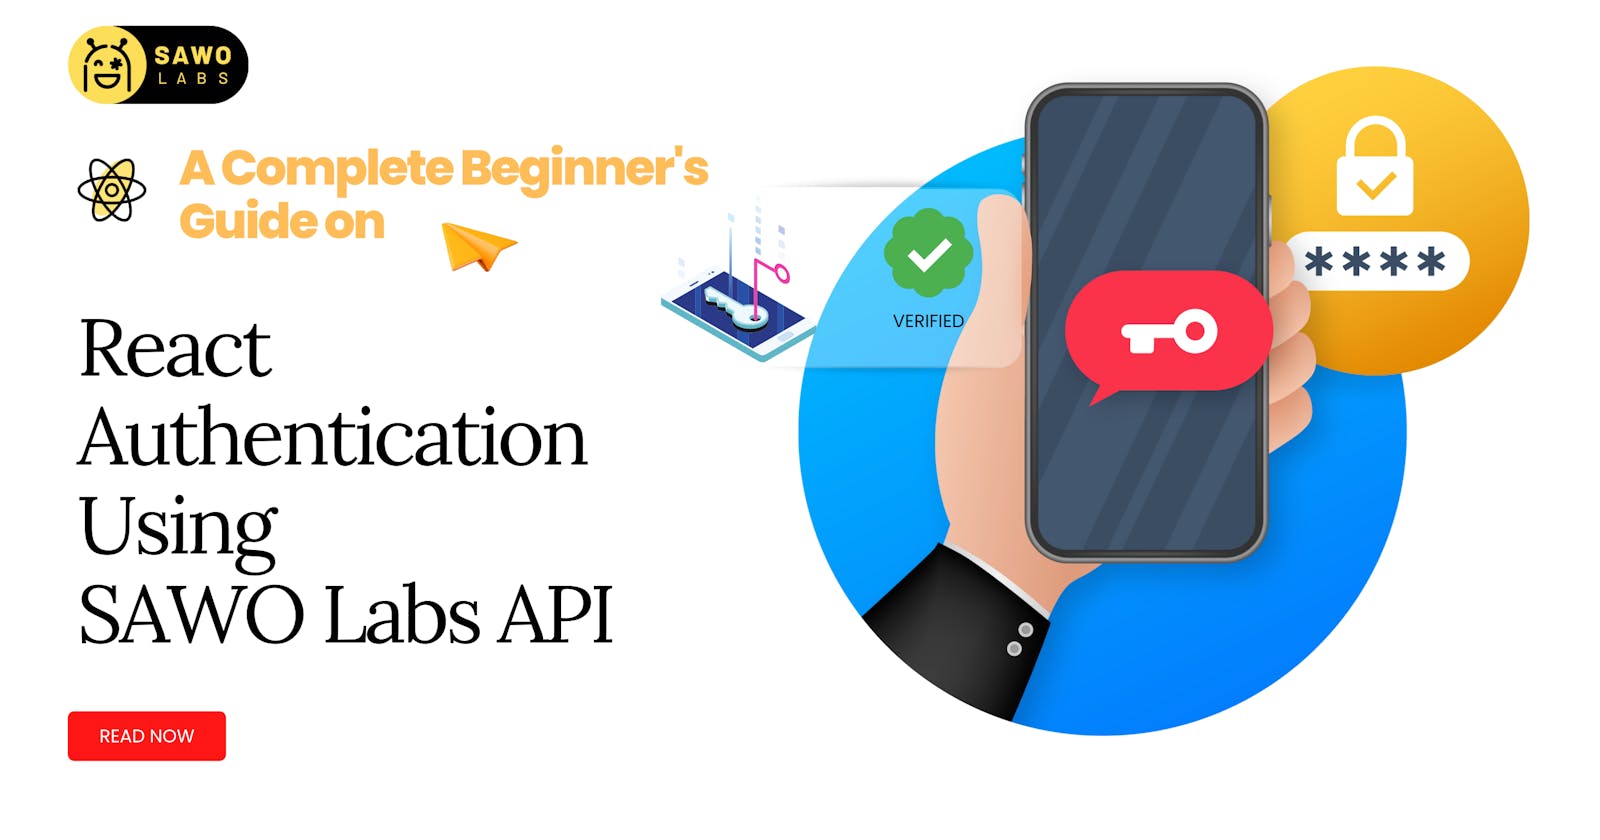 The Complete Beginner's Guide to React Authentication 
Using SAWO Labs API